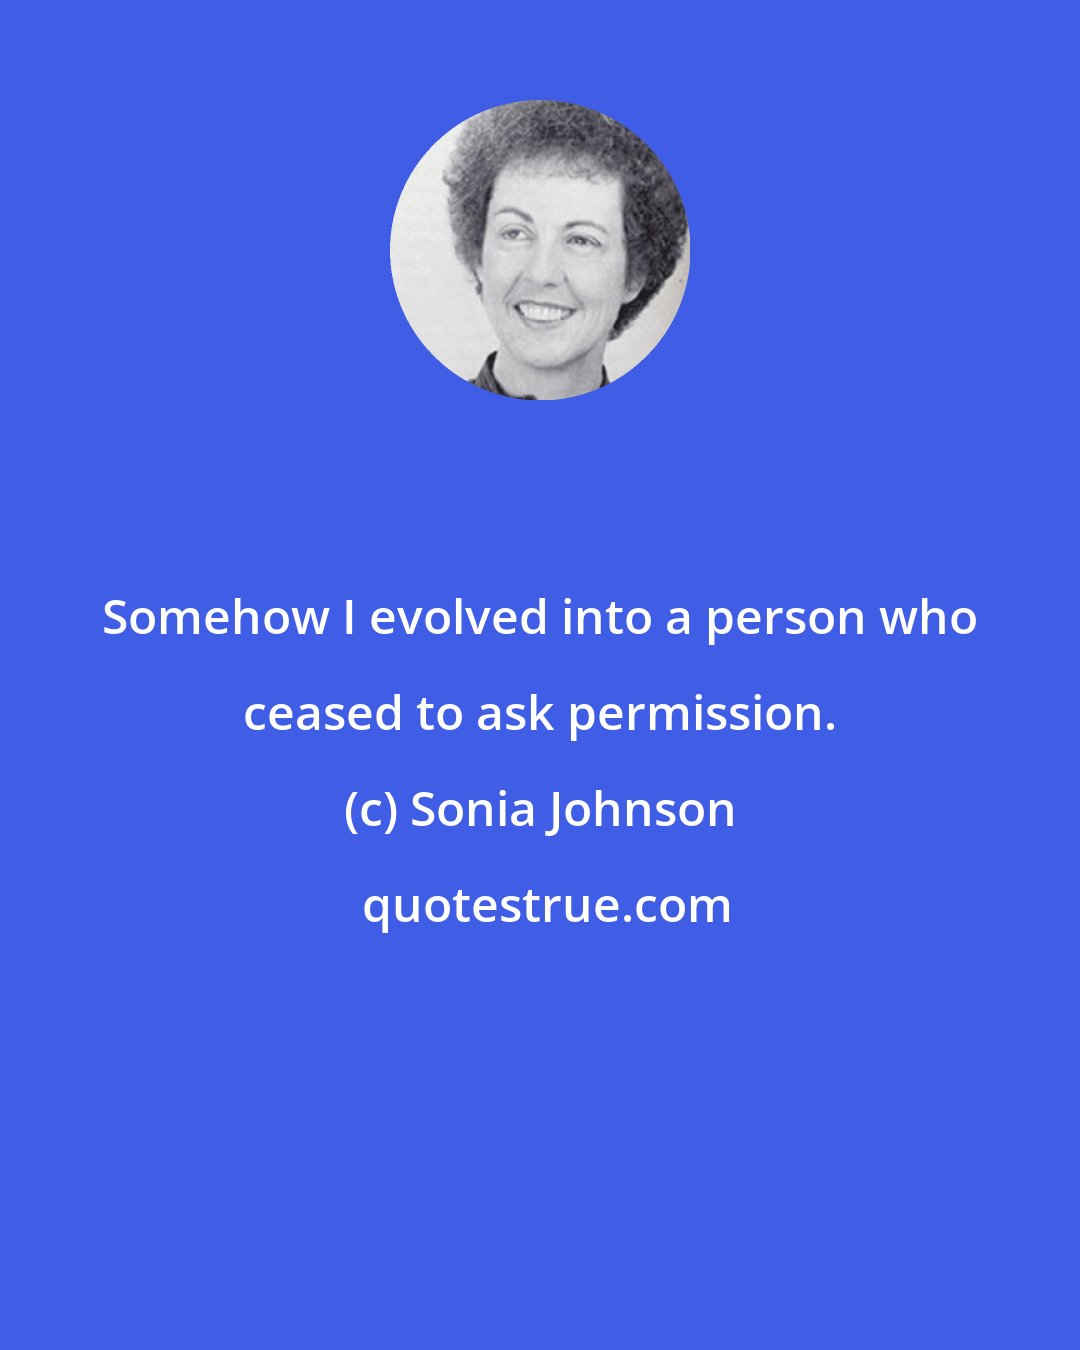 Sonia Johnson: Somehow I evolved into a person who ceased to ask permission.